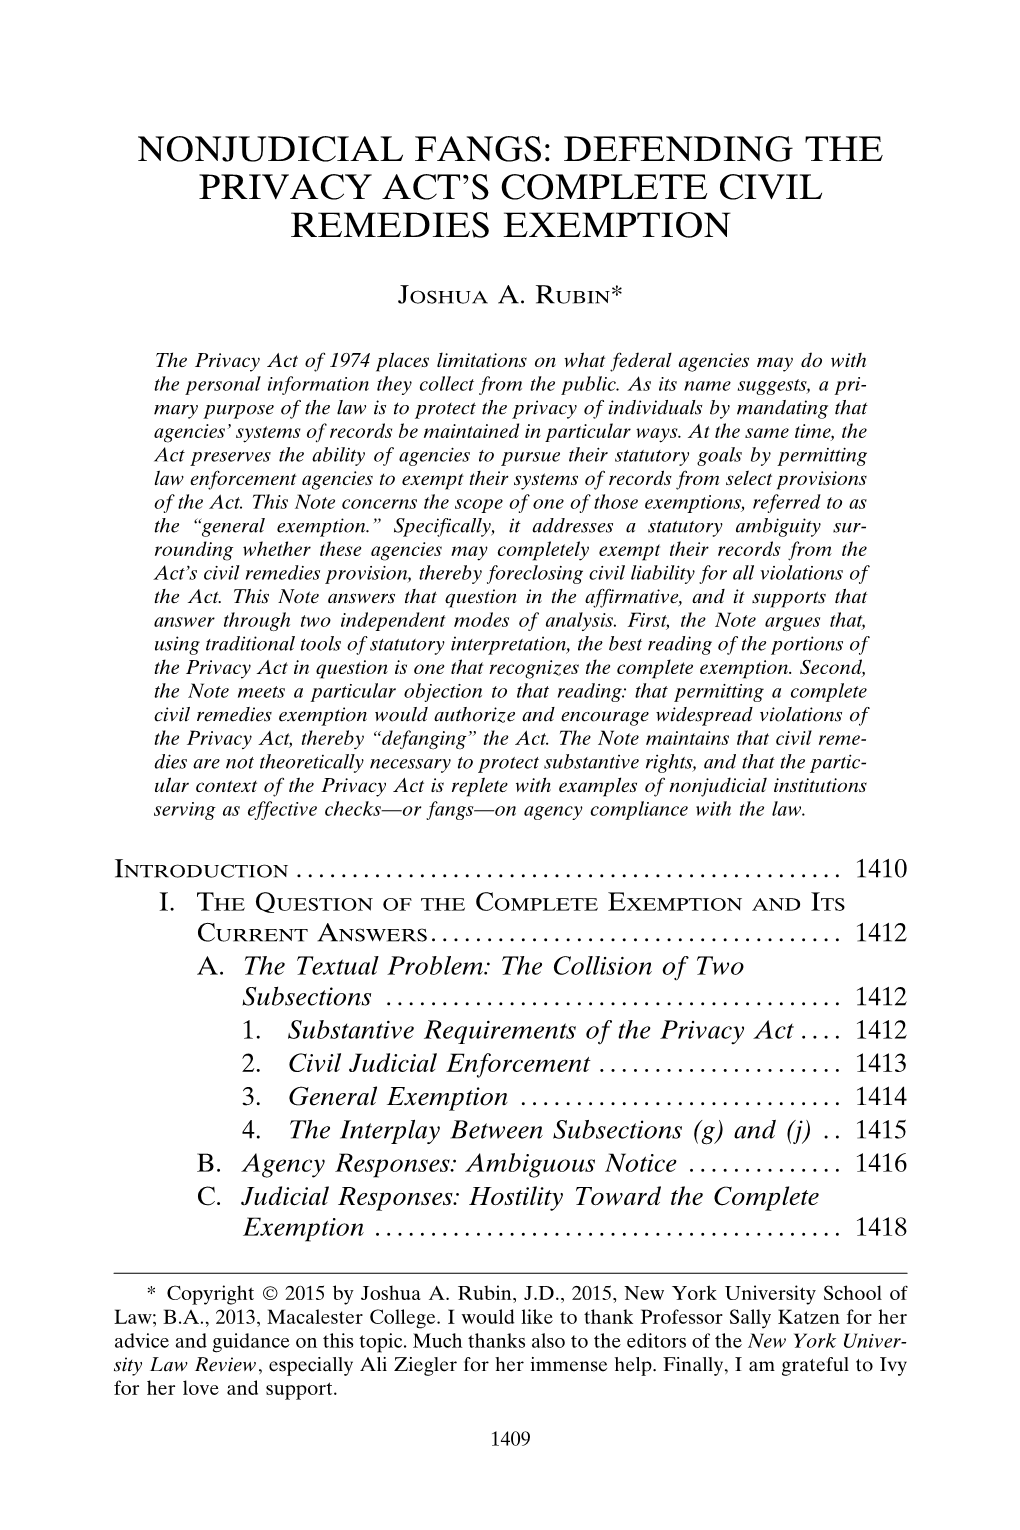 Defending the Privacy Act's Complete Civil Remedies